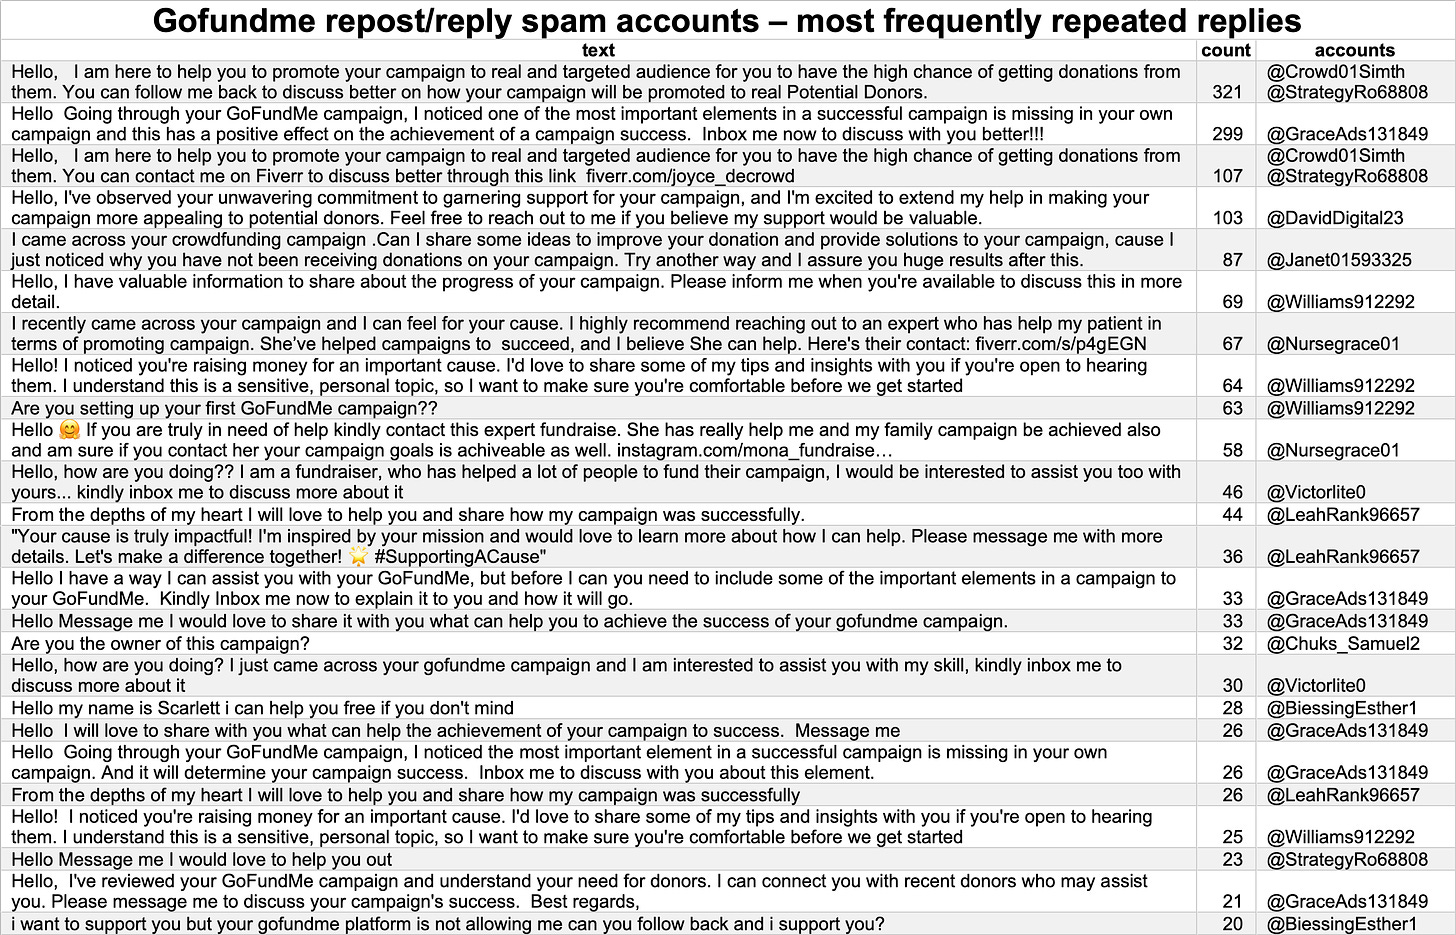 table of repeated replies from crowdfunding spam accounts